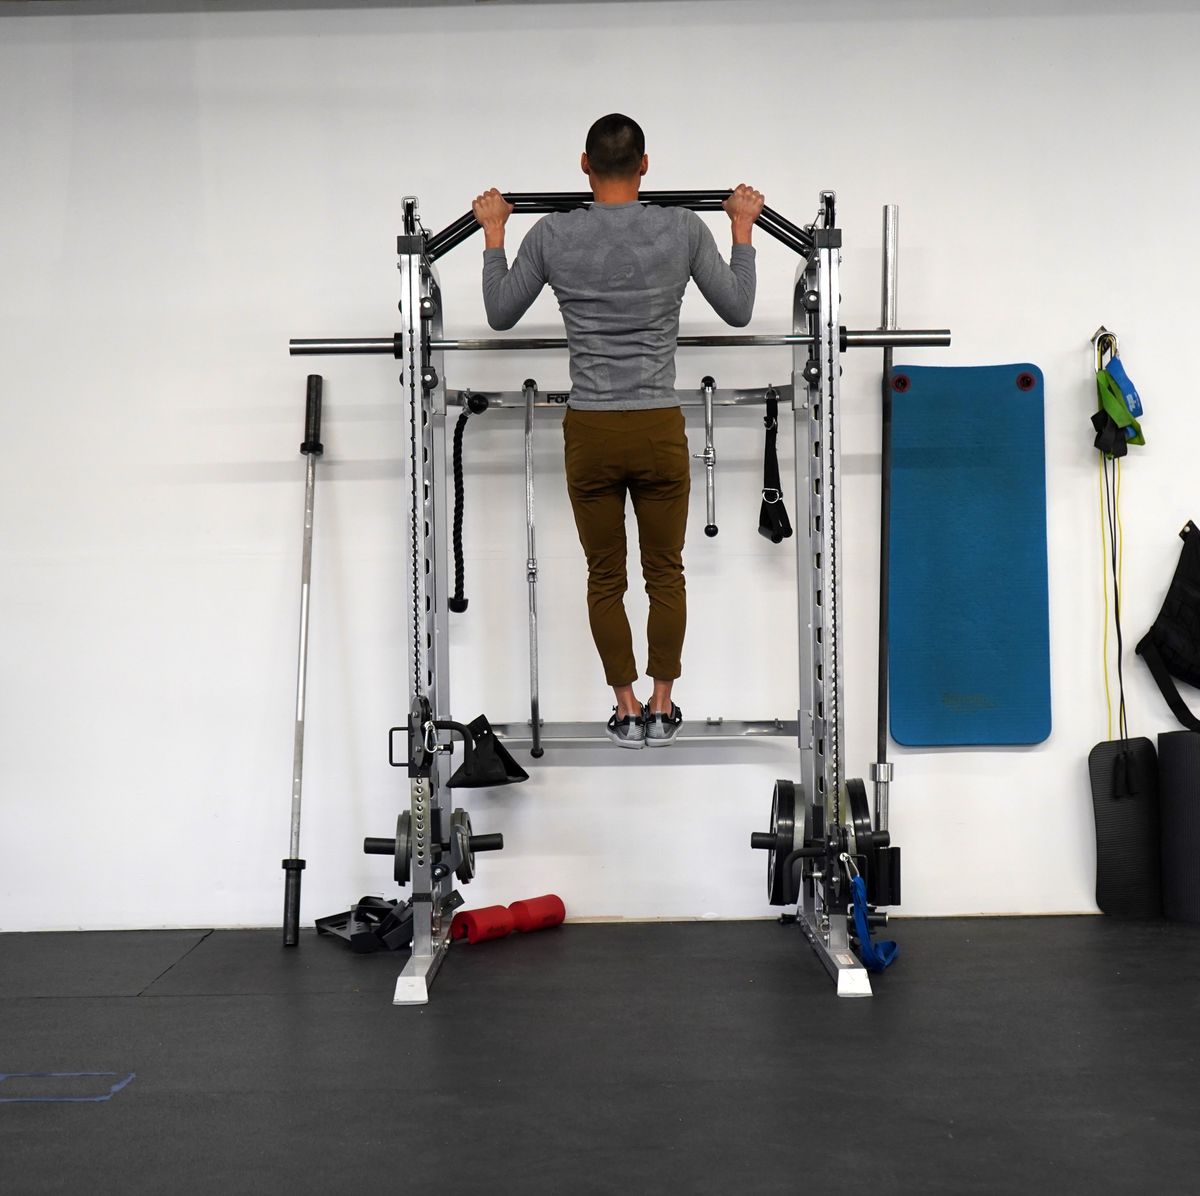 The Beginner's Guide to the Assisted Pull-Up Machine